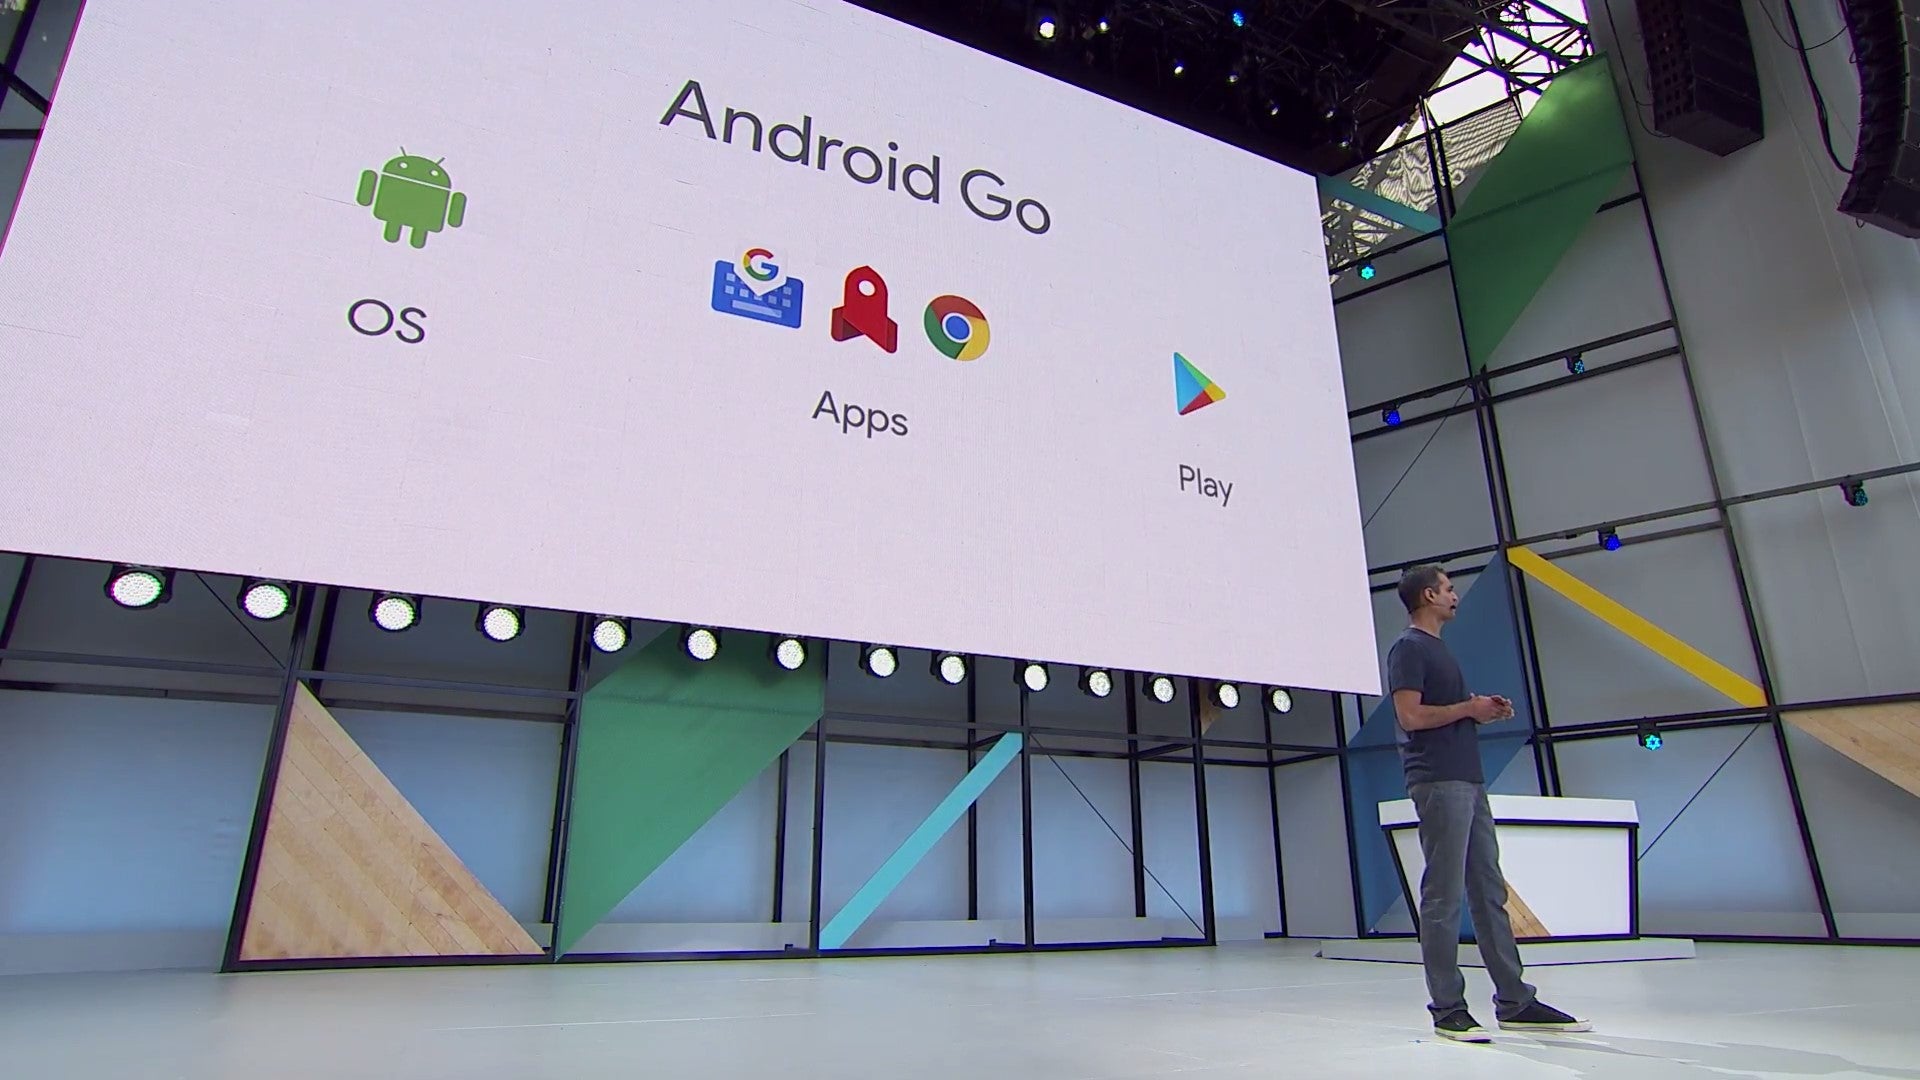 Google announces Android Go, a new set of features and apps for low-end devices